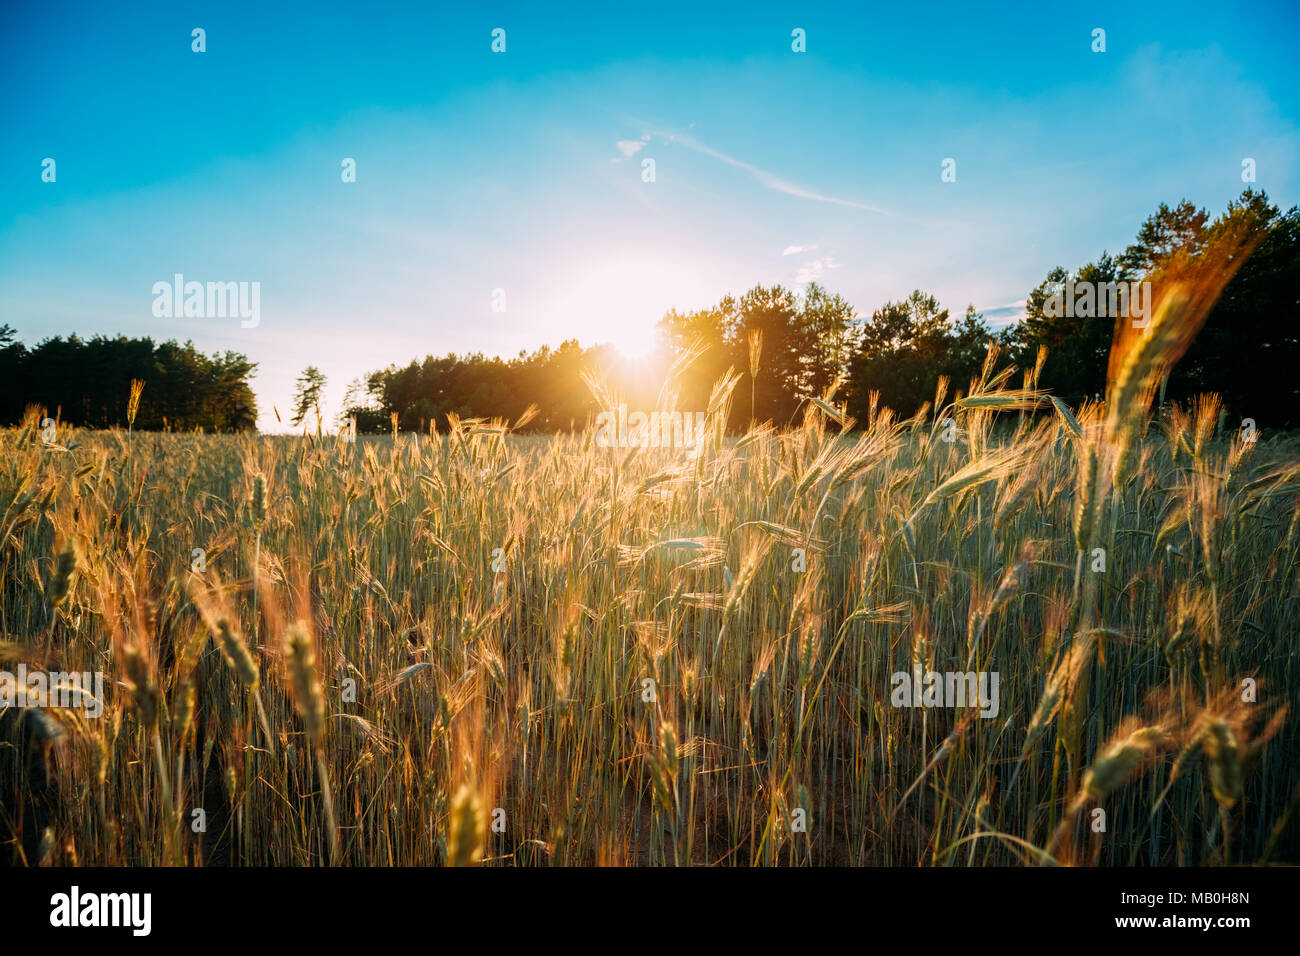 Summer Sun Shining Over Agricultural Landscape Of Green Wheat Field. Young Green Wheat In Sunset Dawn Time. June Month. Stock Photo